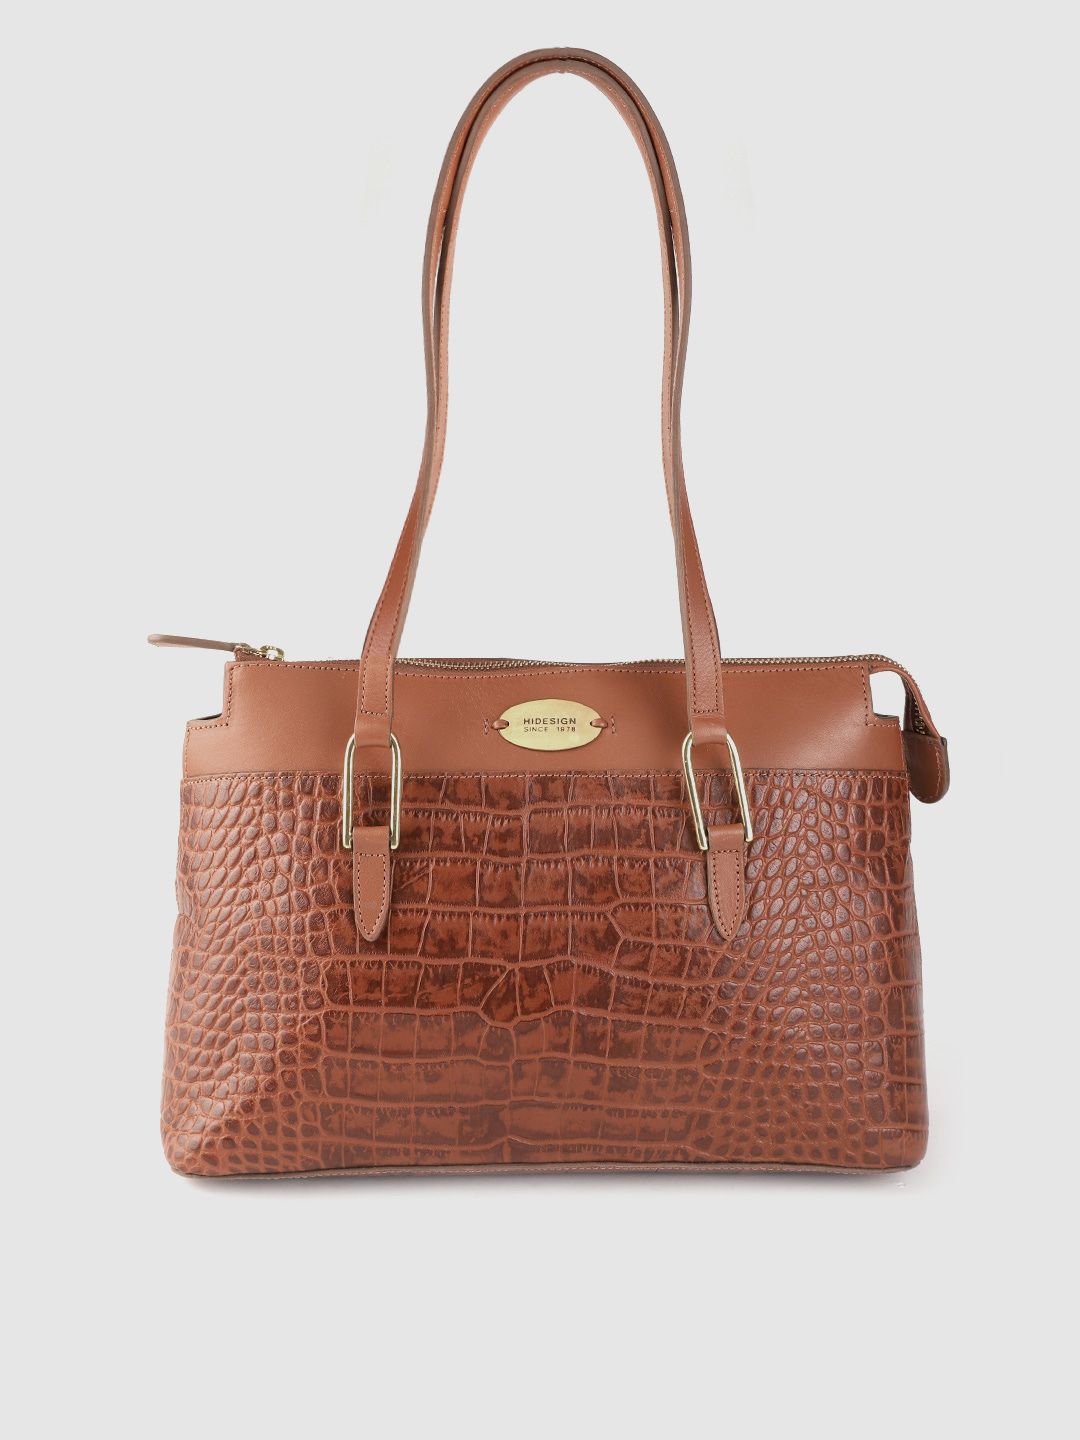 Hidesign Women Brown Croc-Textured Leather Structured Handcrafted Shoulder Bag Price in India